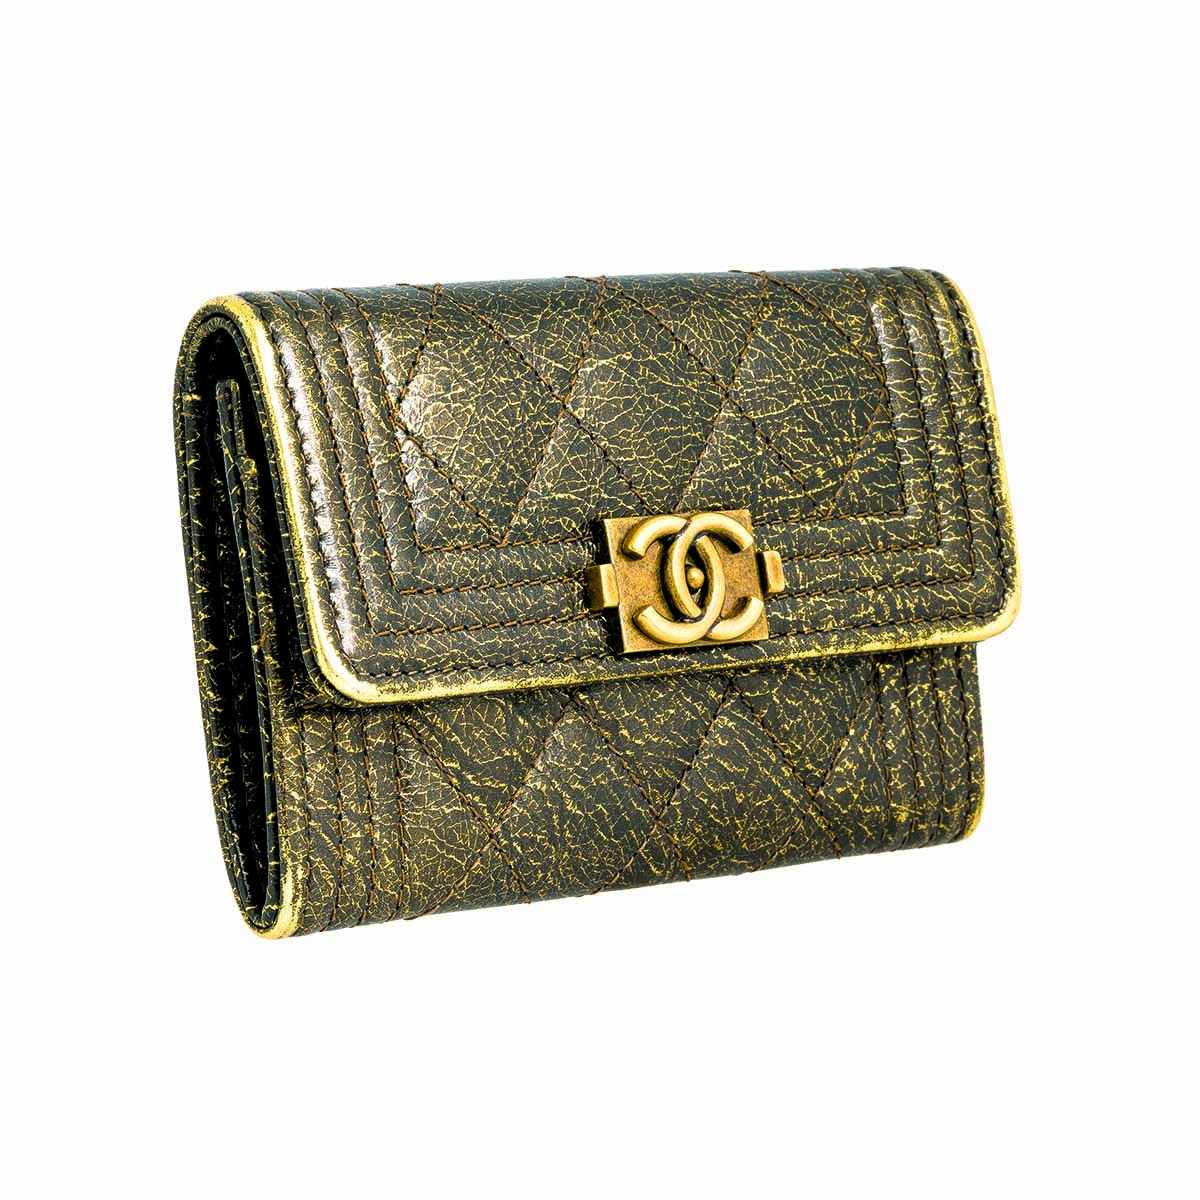 Vintage Chanel Boy Card Holder - Shop Jewelry, Watches & Accessories